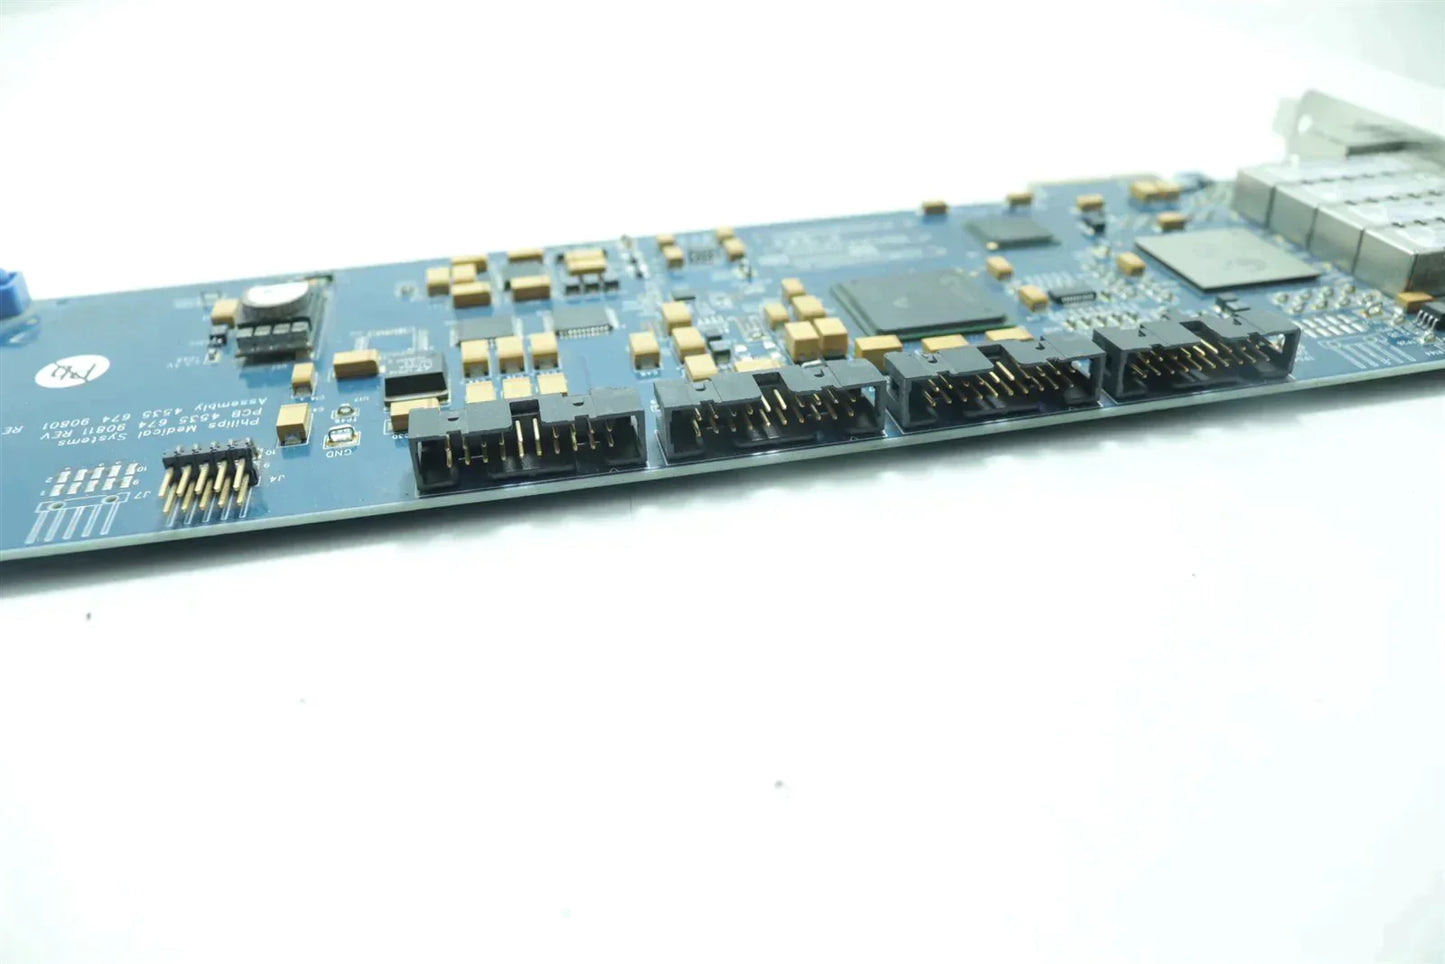 Philips Medical Systems PCB 4535 674 90811 Rev A 4535 674 90801 REV 9 Assembly